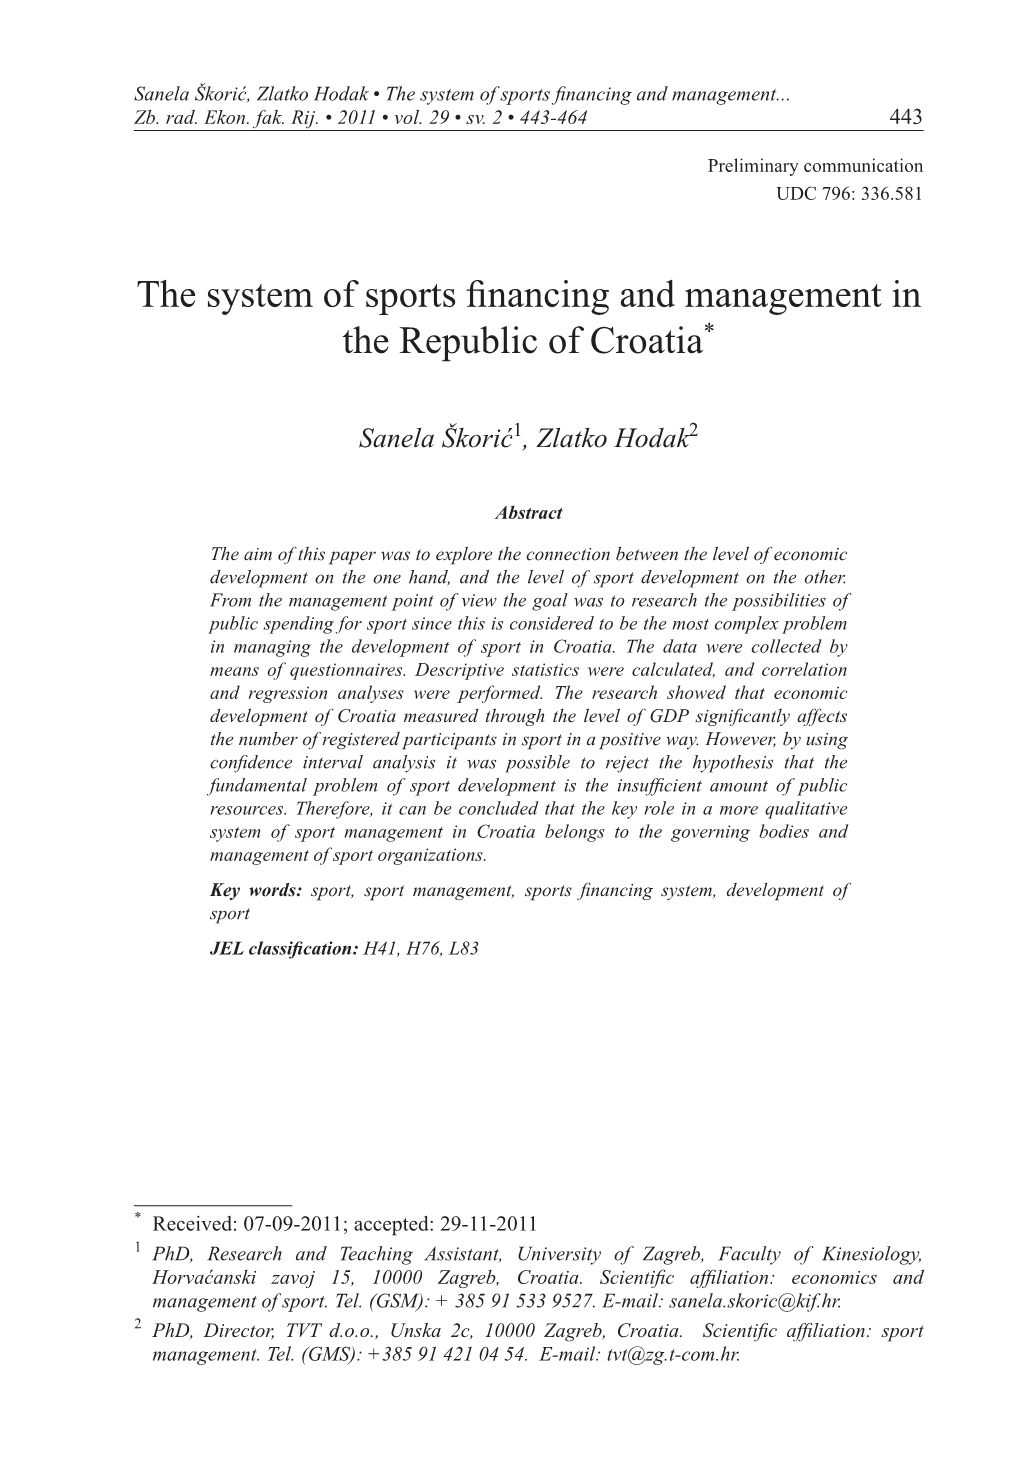 The System of Sports Financing and Management in the Republic of Croatia*